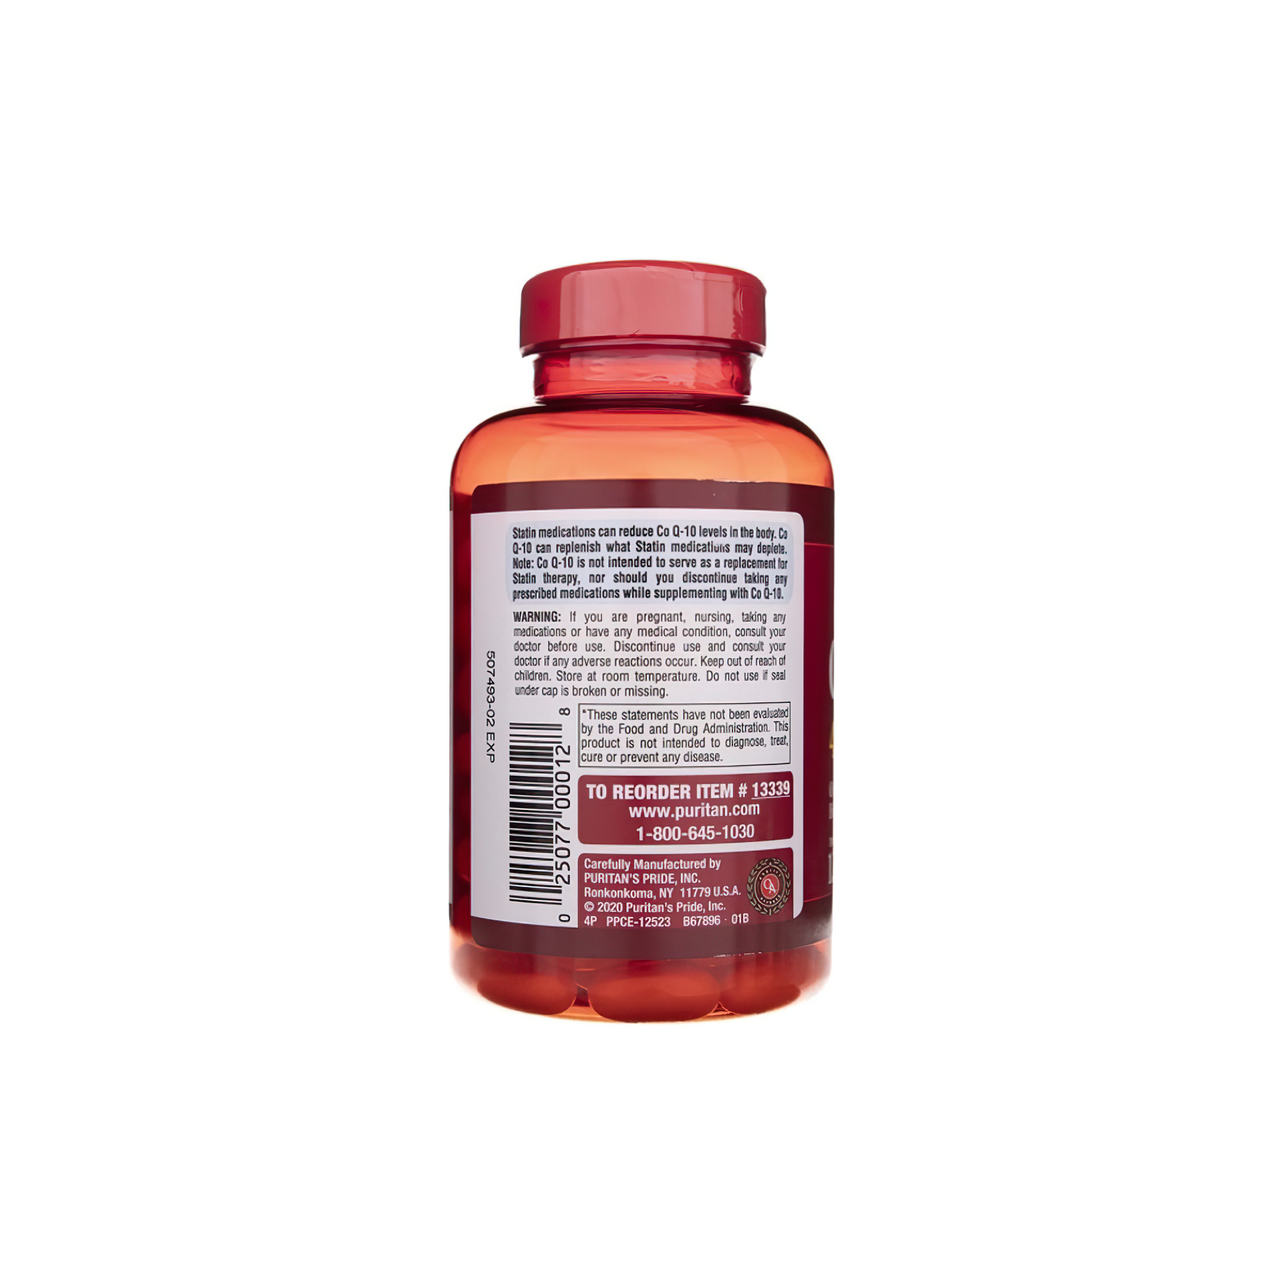 A bottle of Puritan's Pride Coenzyme Q10 Rapid Release 400 mg 120 Sgel on a white background.